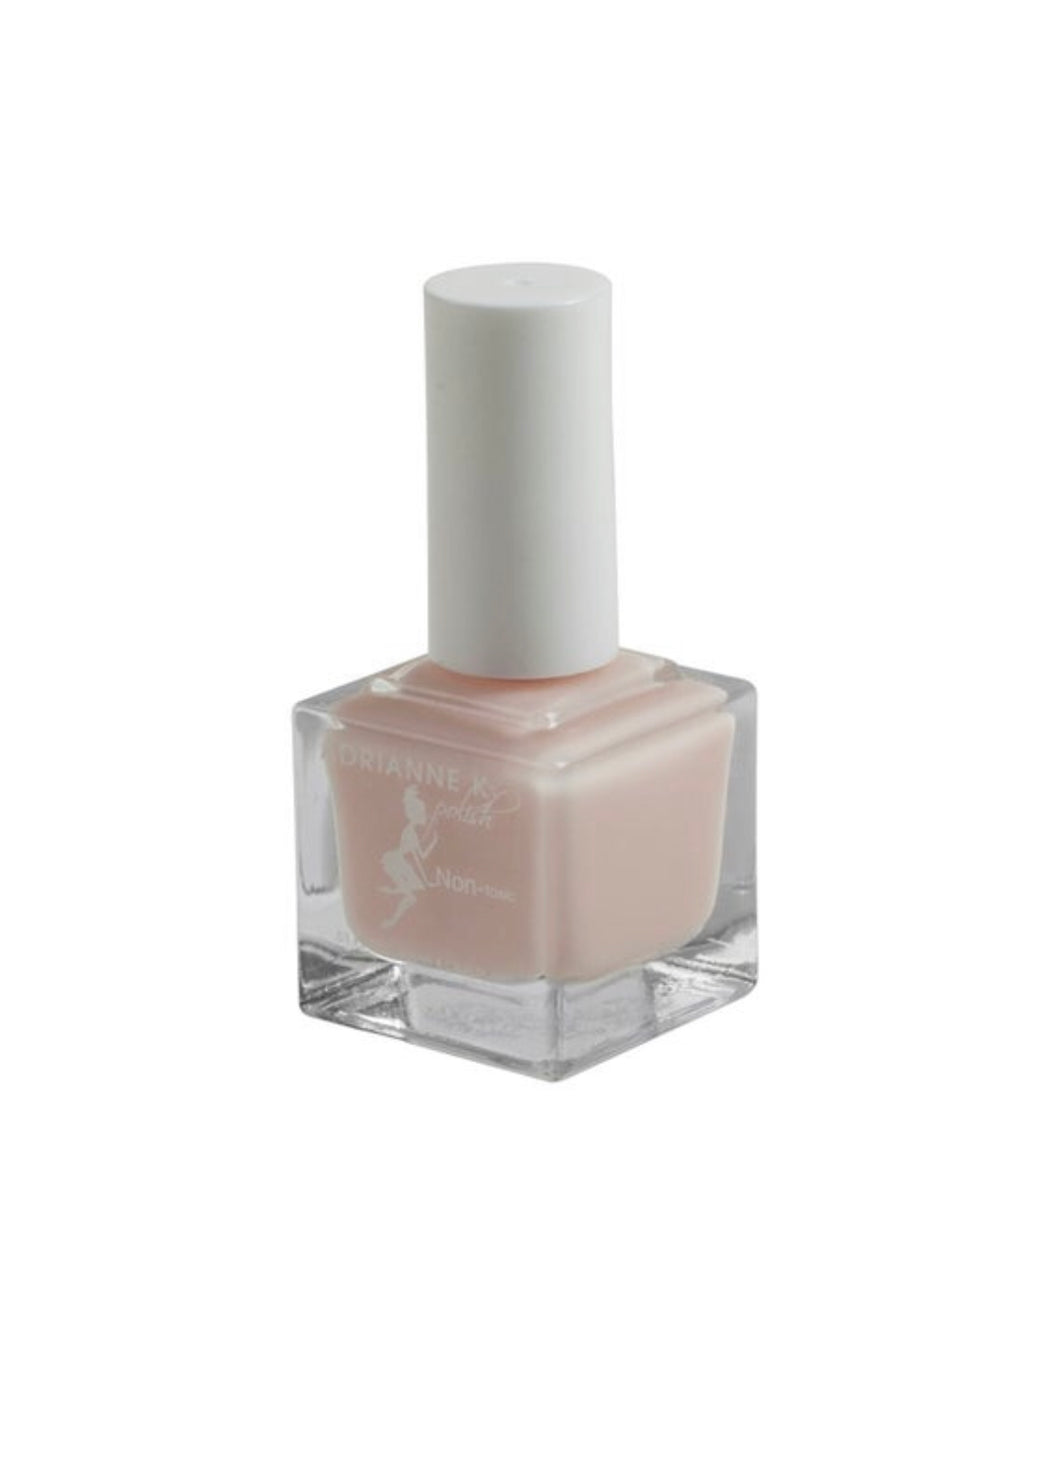 nutri base! best repair treatment nail polish for brittle nails. pale pink/neutral tint, shiny finish . .51 fl oz. made in usa